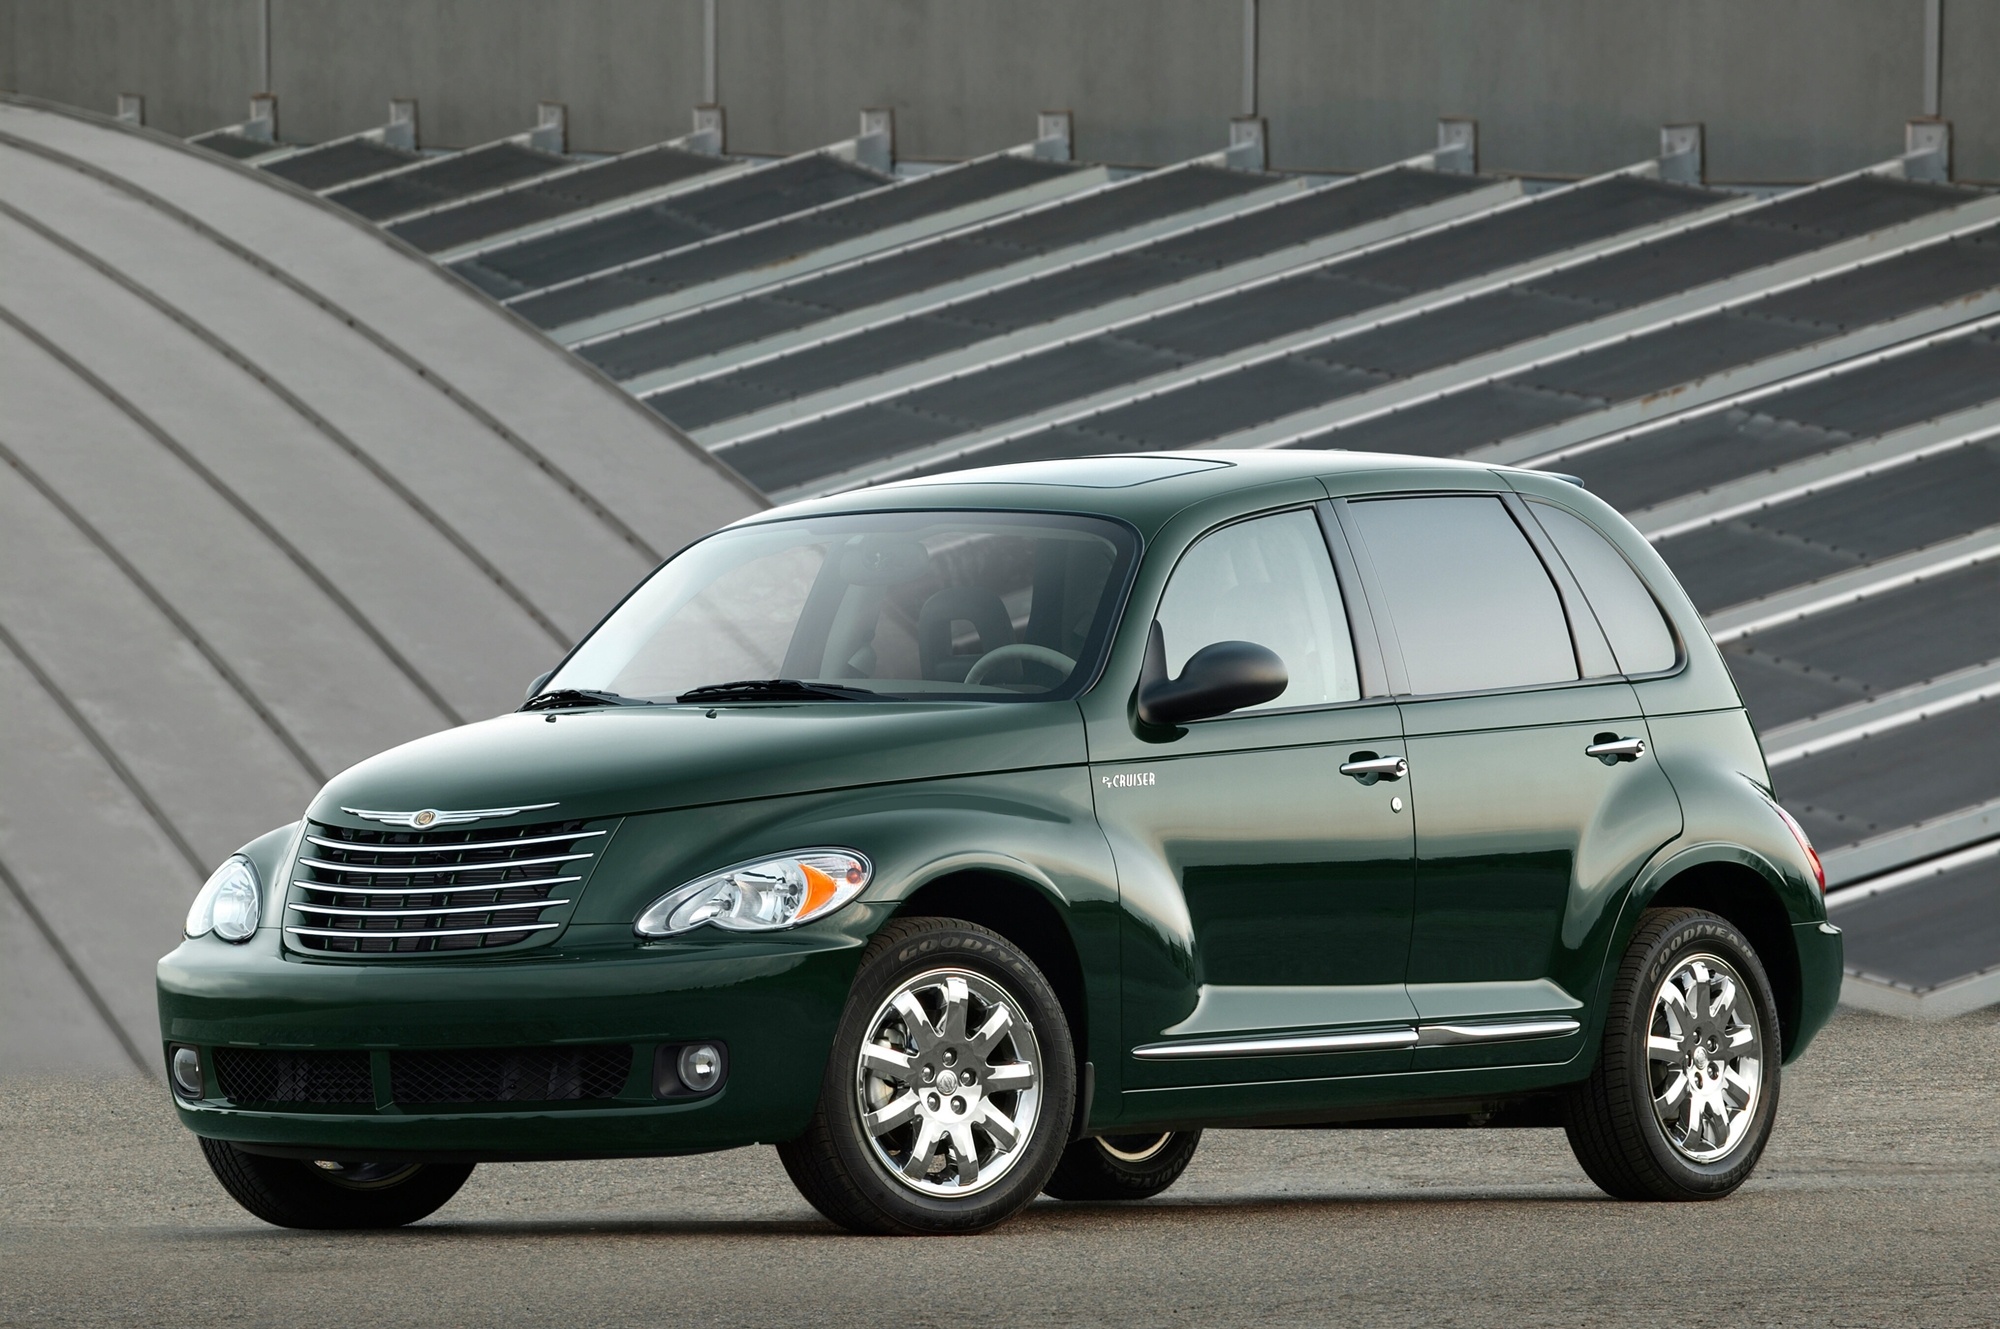 Chrysler PT Cruiser Limited, Auto specifications, 2009 model, Wagon features, 2000x1330 HD Desktop